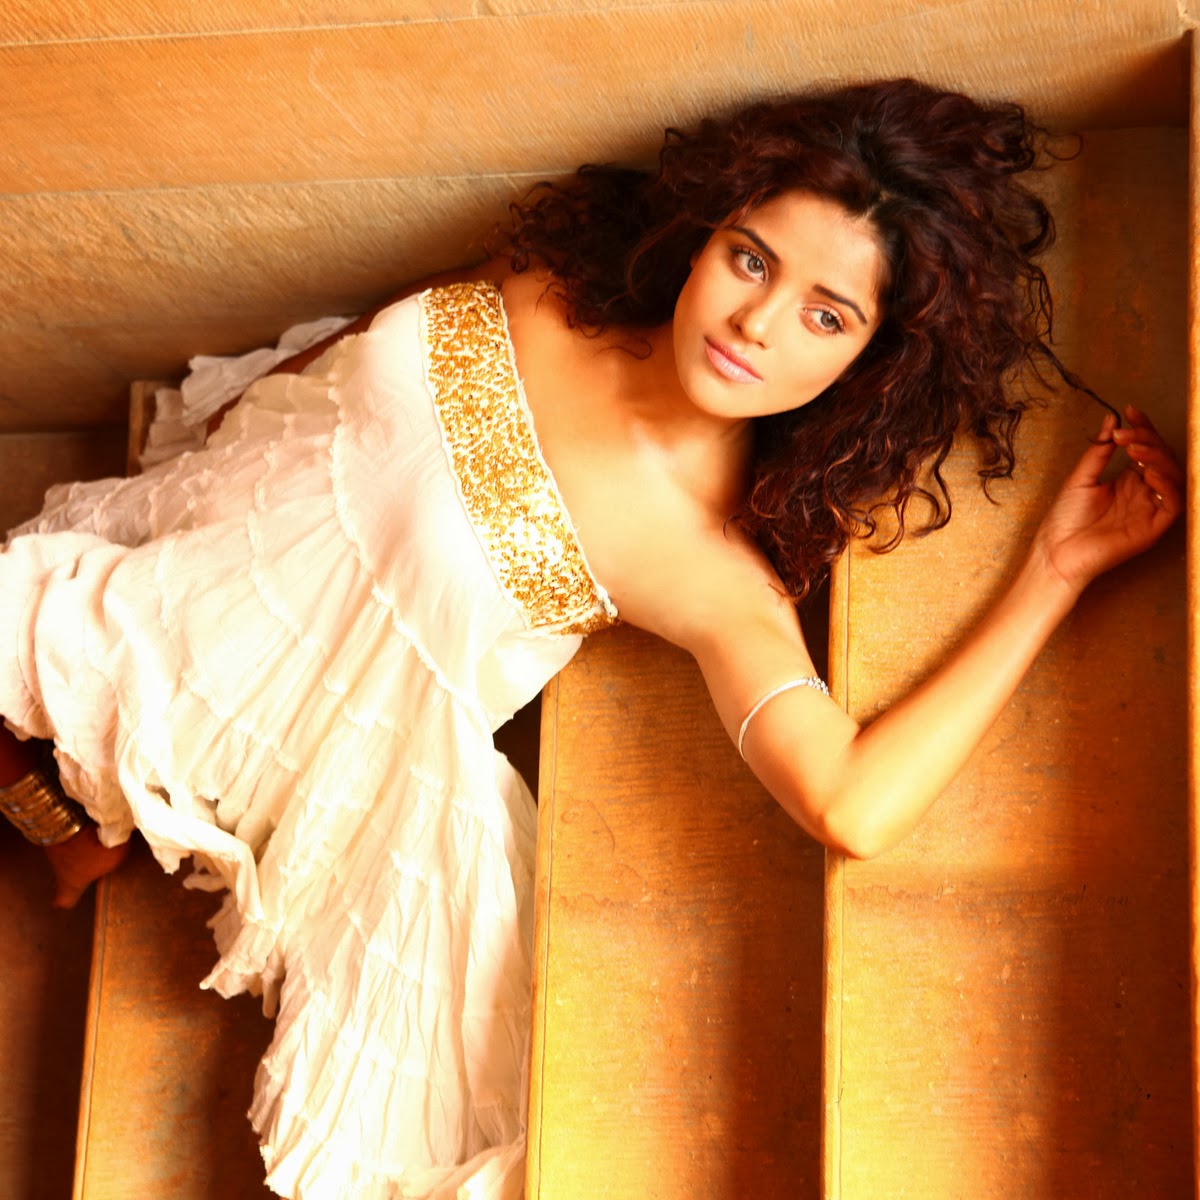 ... piaa bajpai pictures look at these pretty pictures of pia bajpai